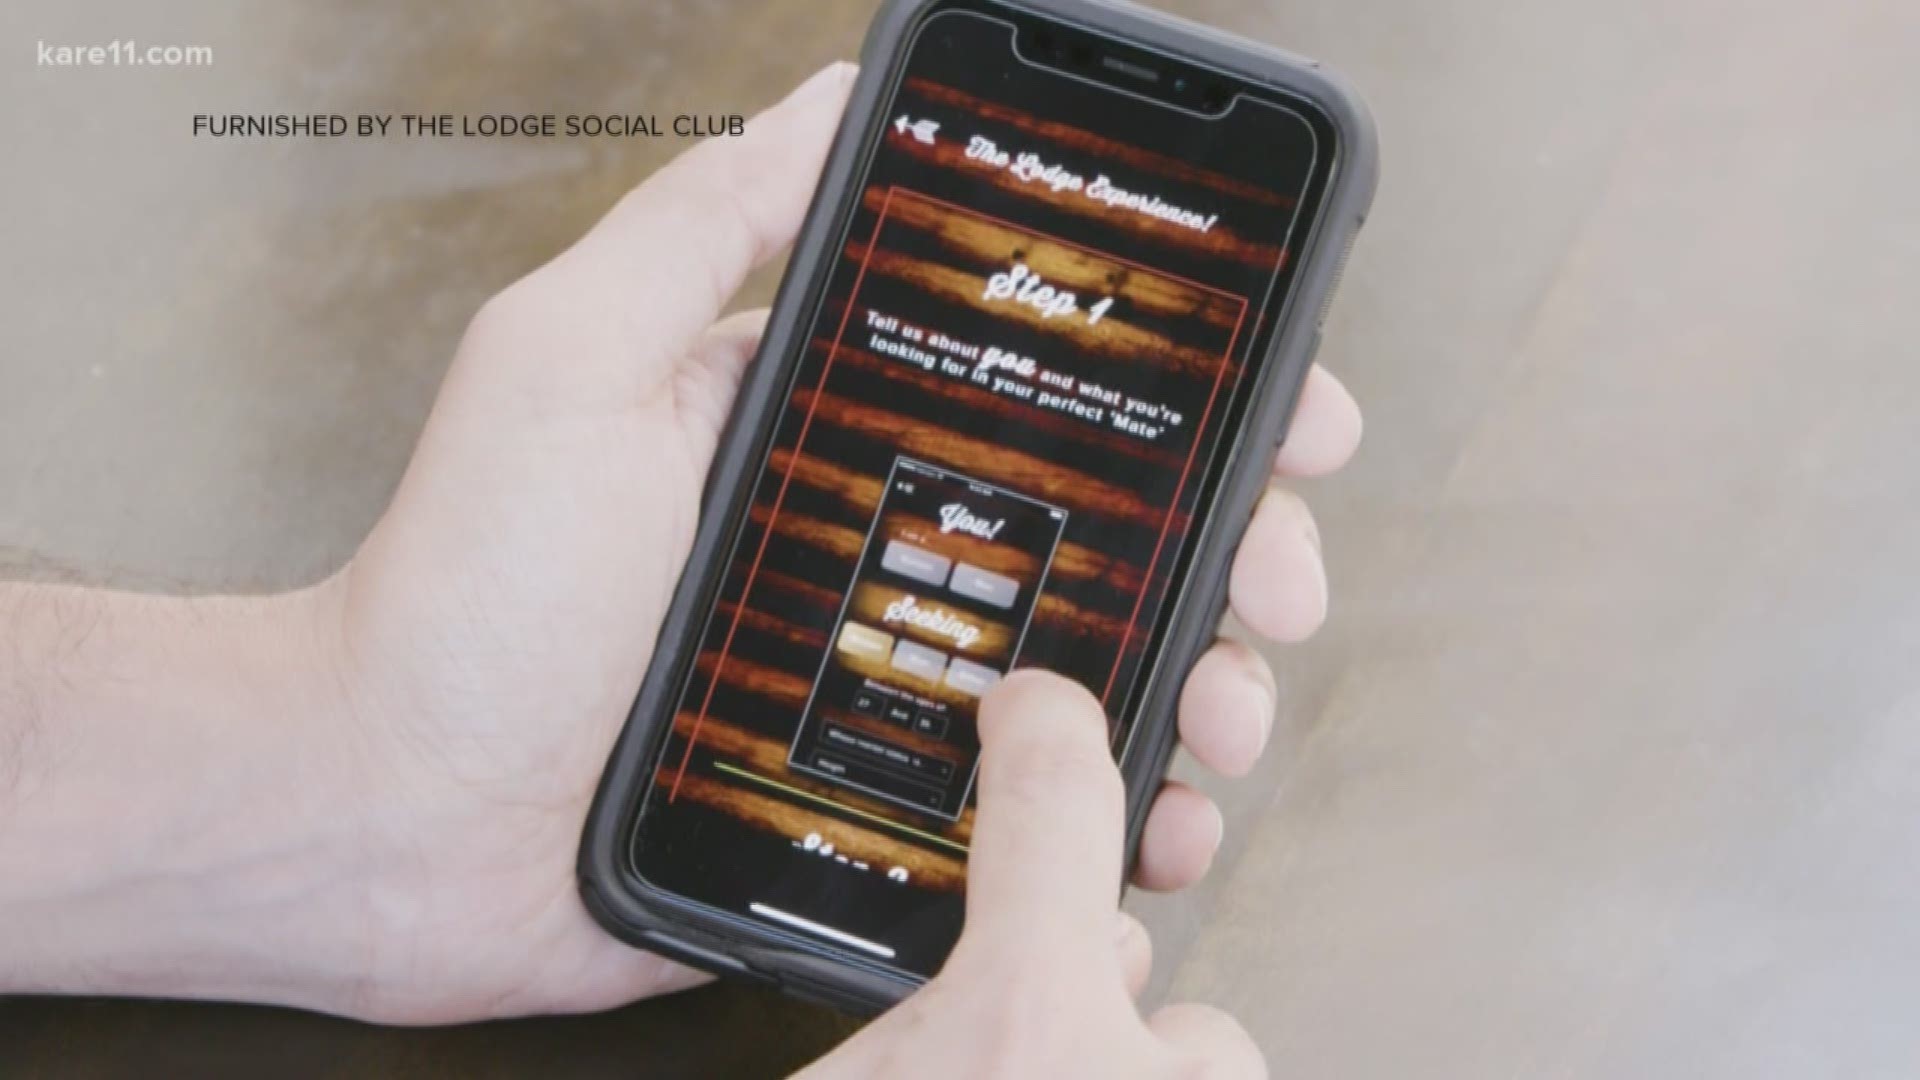 The Lodge Social Club dating app involves an in-depth vetting process that includes a background check, ensuring you know who you're really talking to. https://kare11.tv/2USZCUI